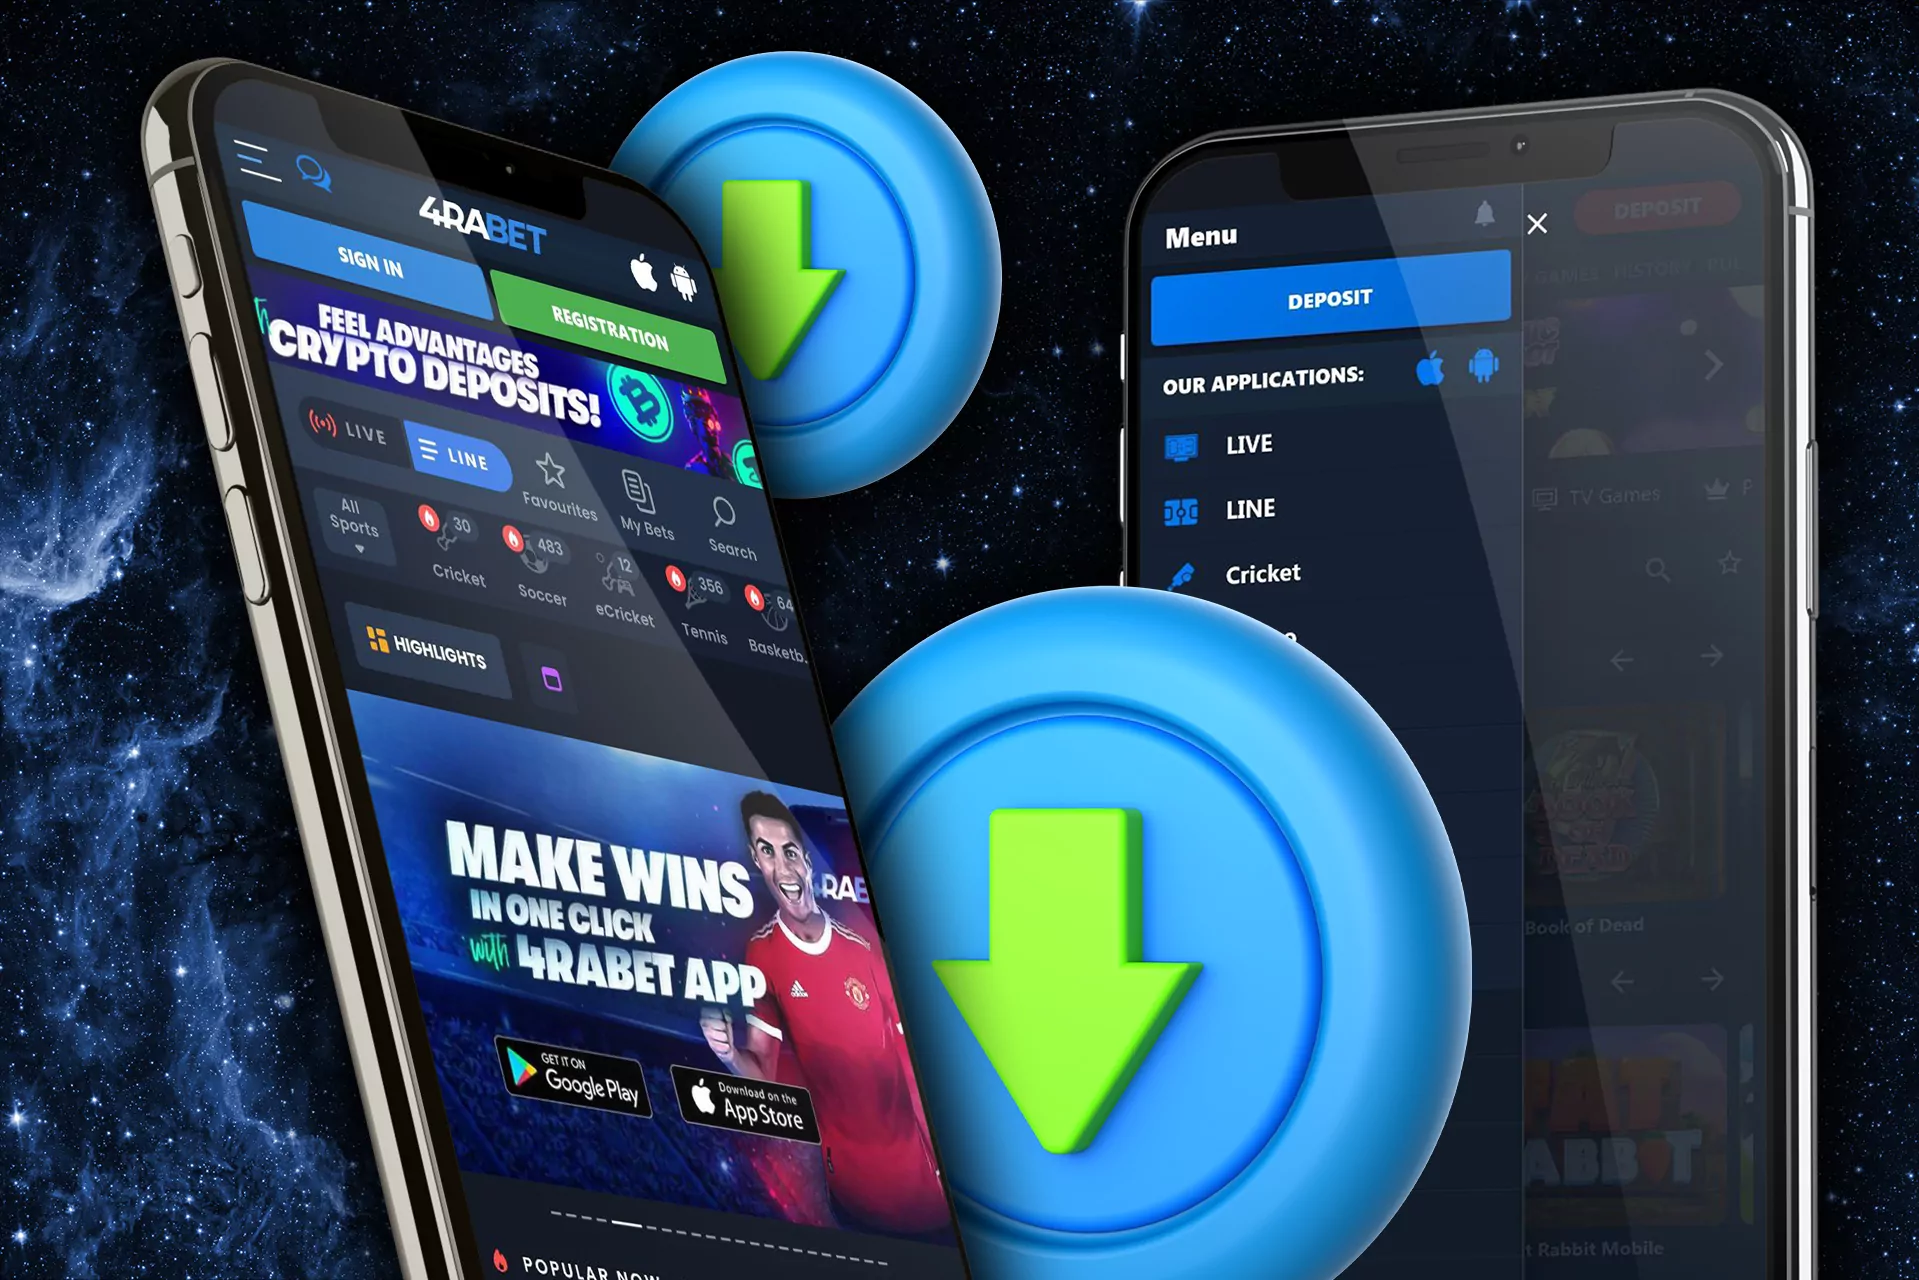 Download the 4rabet mobile app and place bets whenever you want.